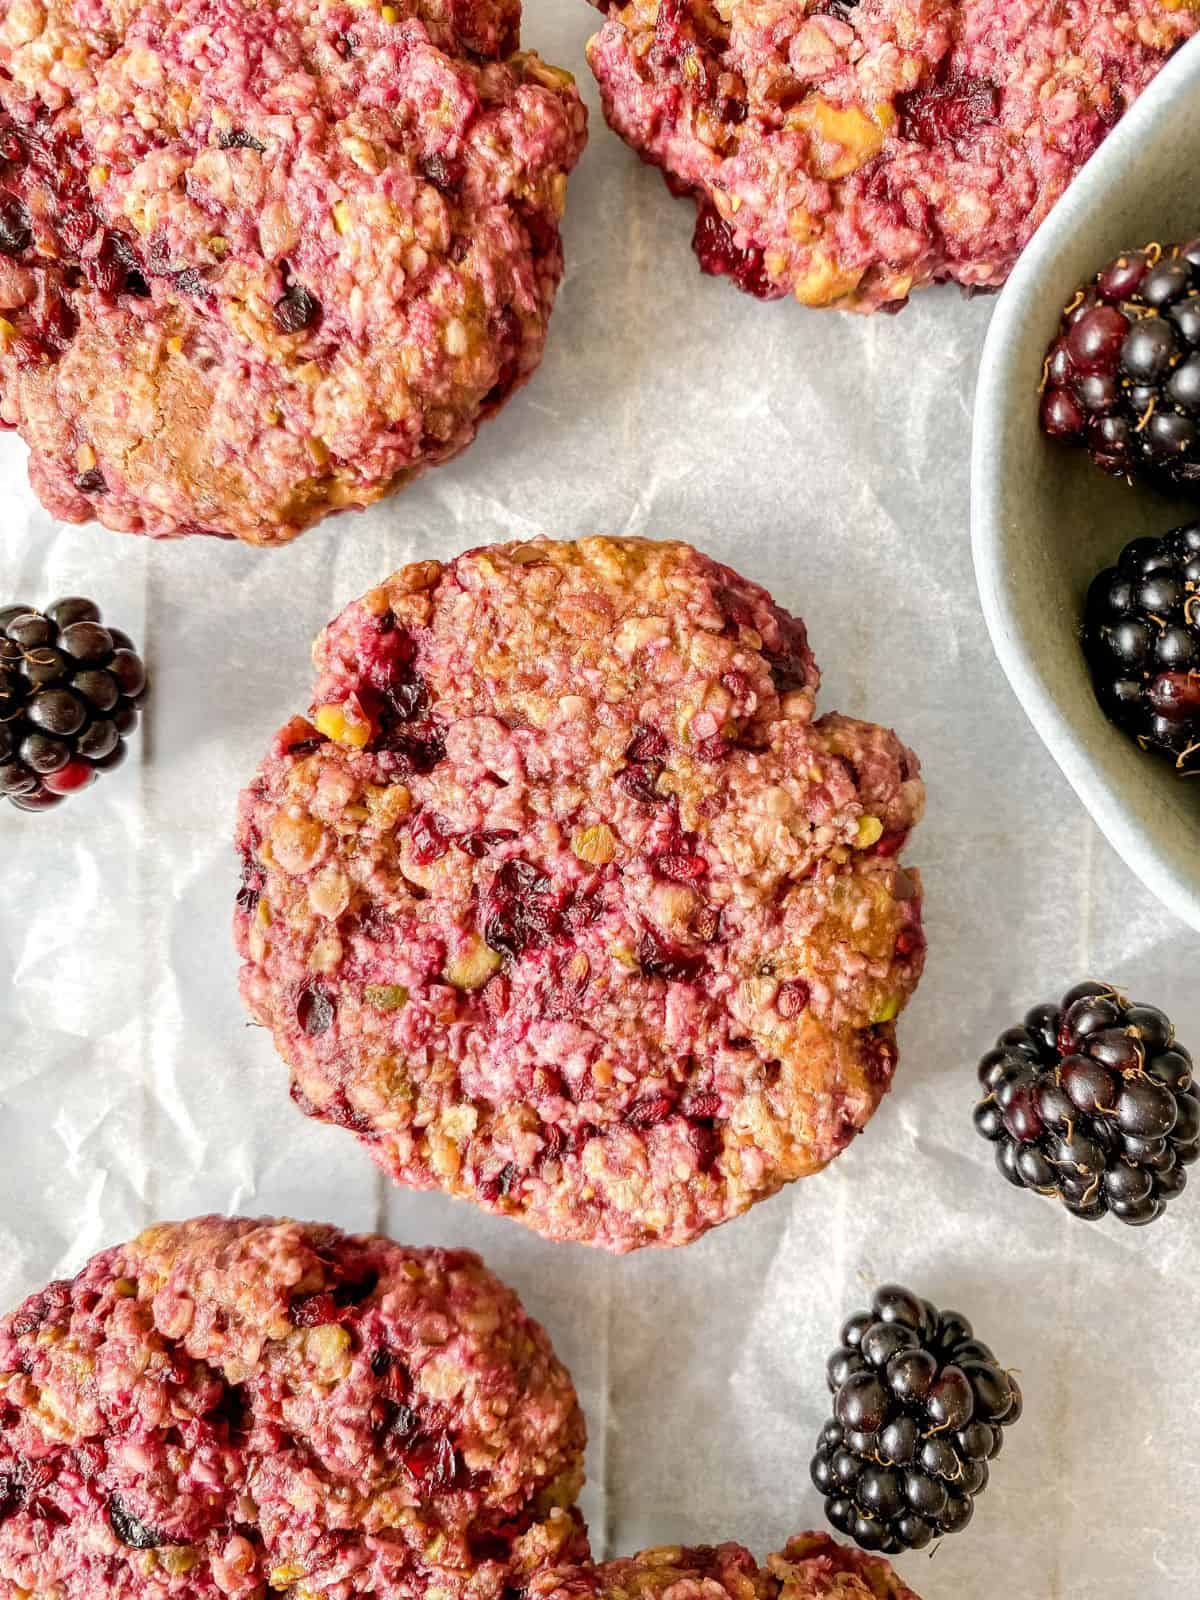 blackberry oatmeal cookies on parchment paper next to fresh blackberries.